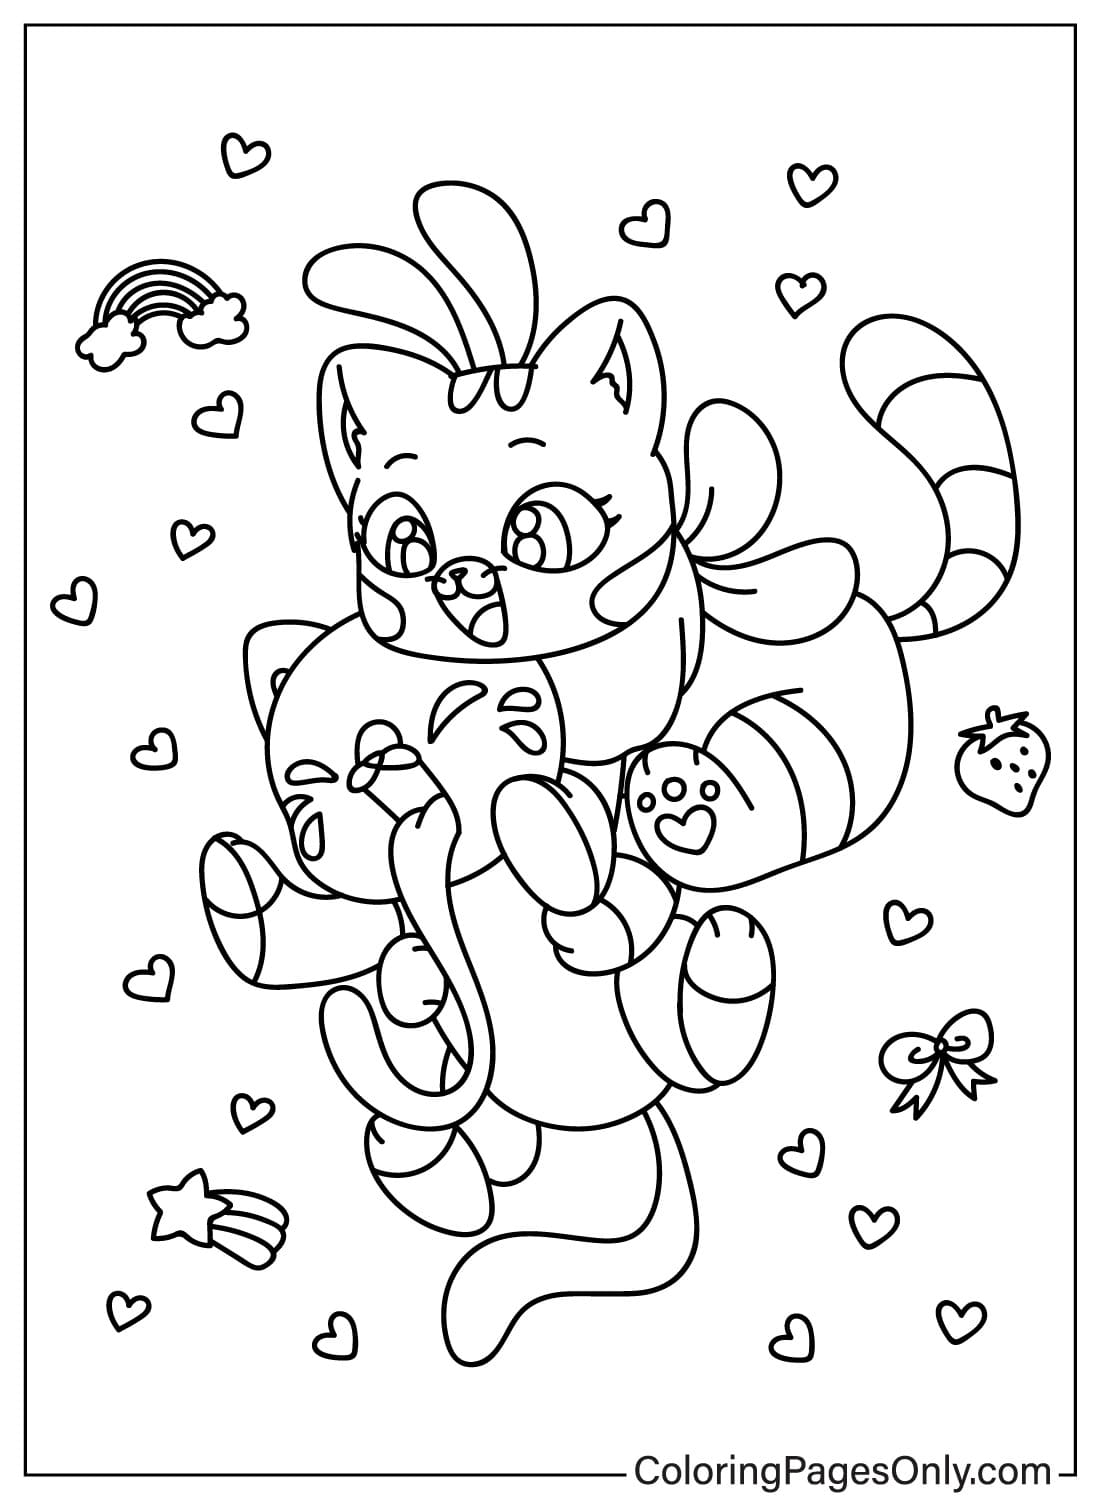 Poppy Playtime Pictures Coloring Page from Poppy Playtime